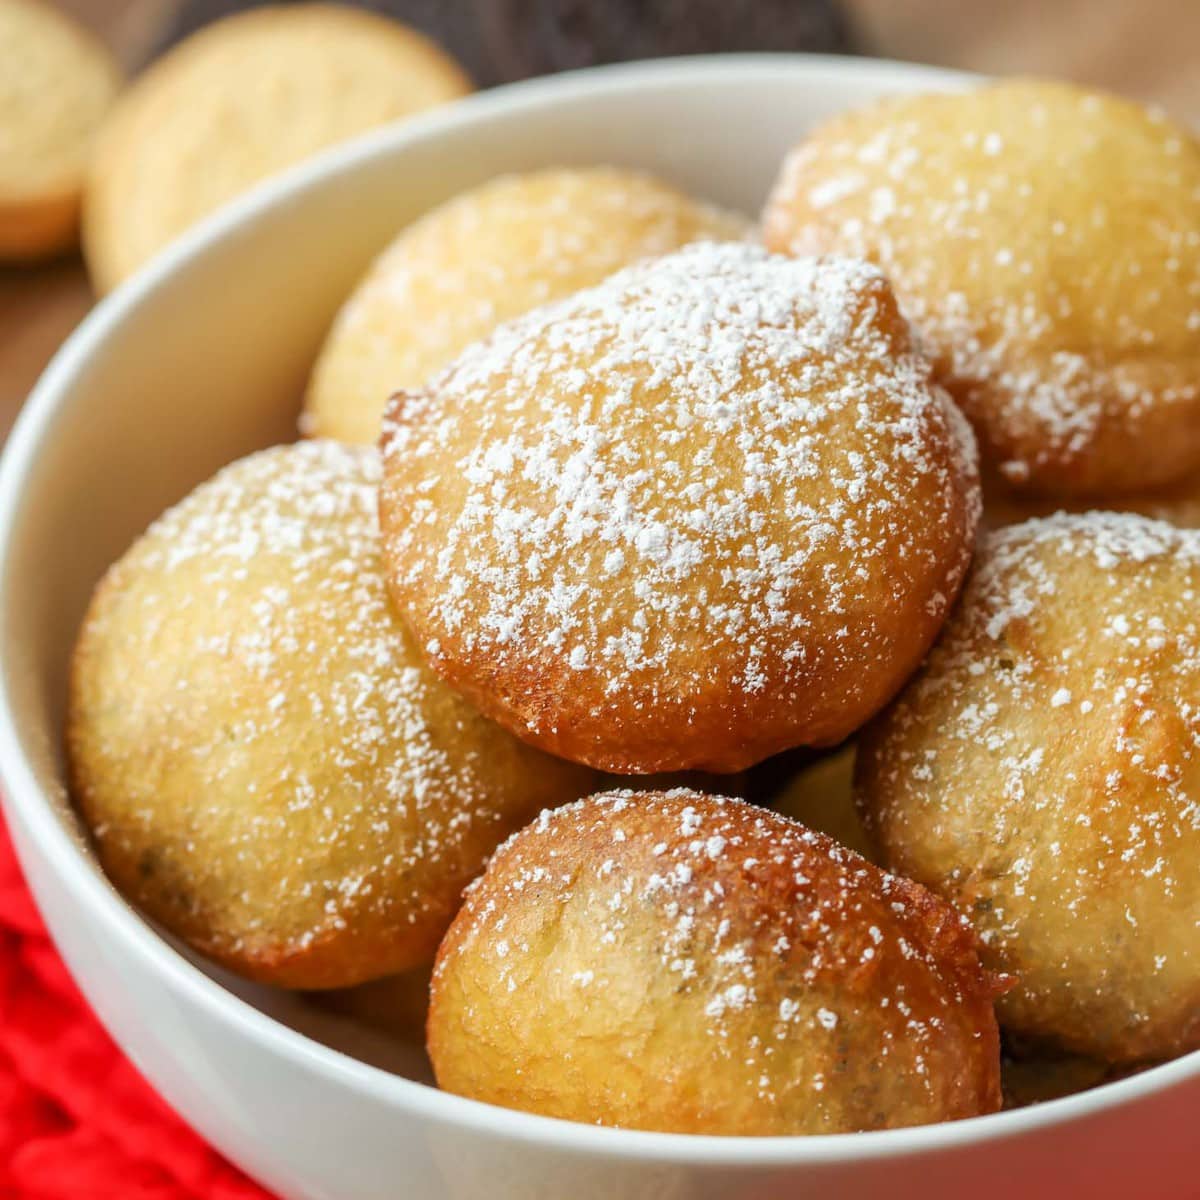 Fried Oreos topped with powder sugar, piled in bowl.